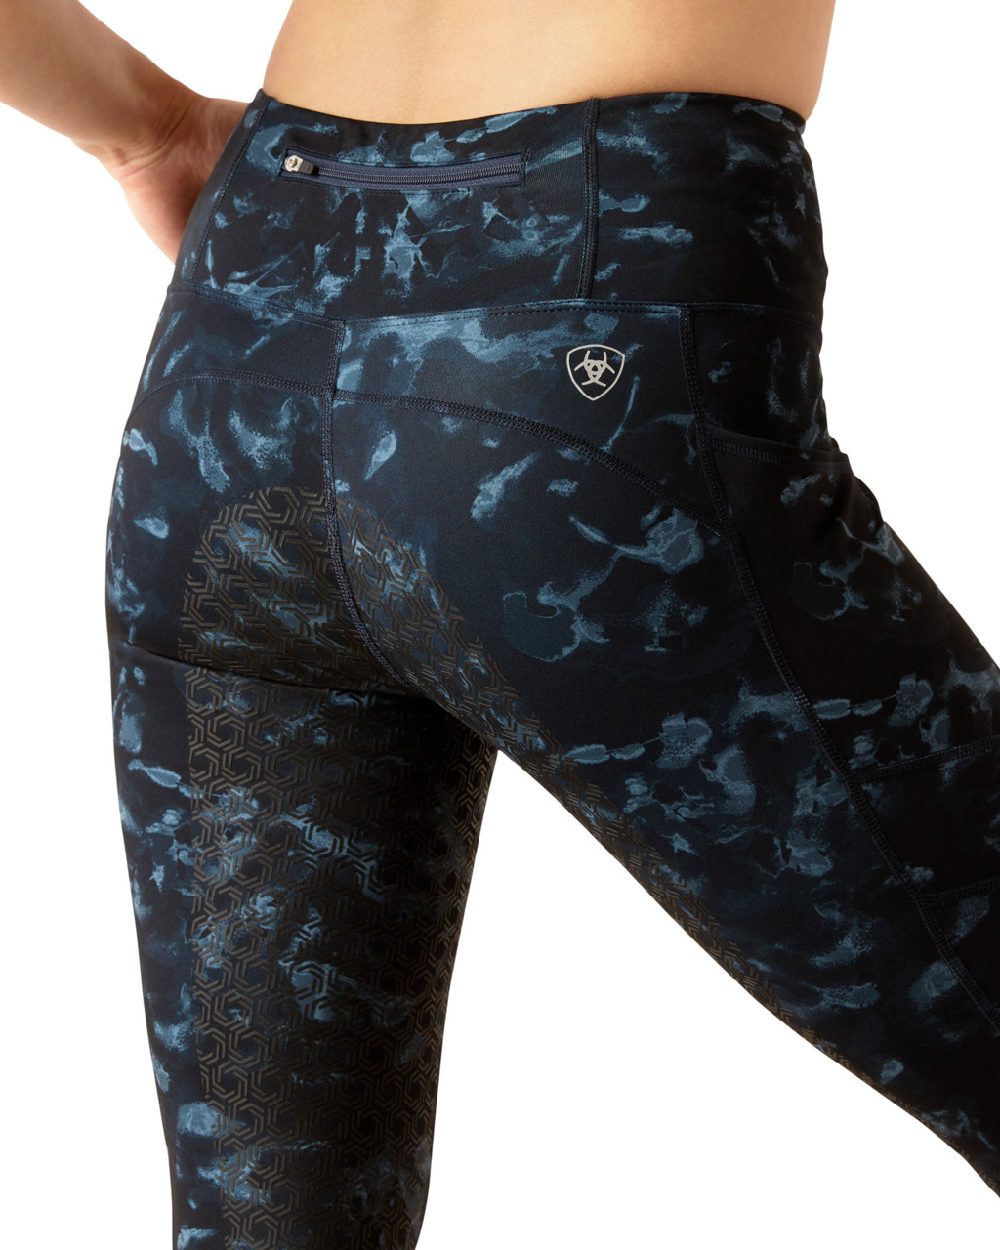 Ariat Womens Eos Print Full Seat Tights in Stormy Skies 